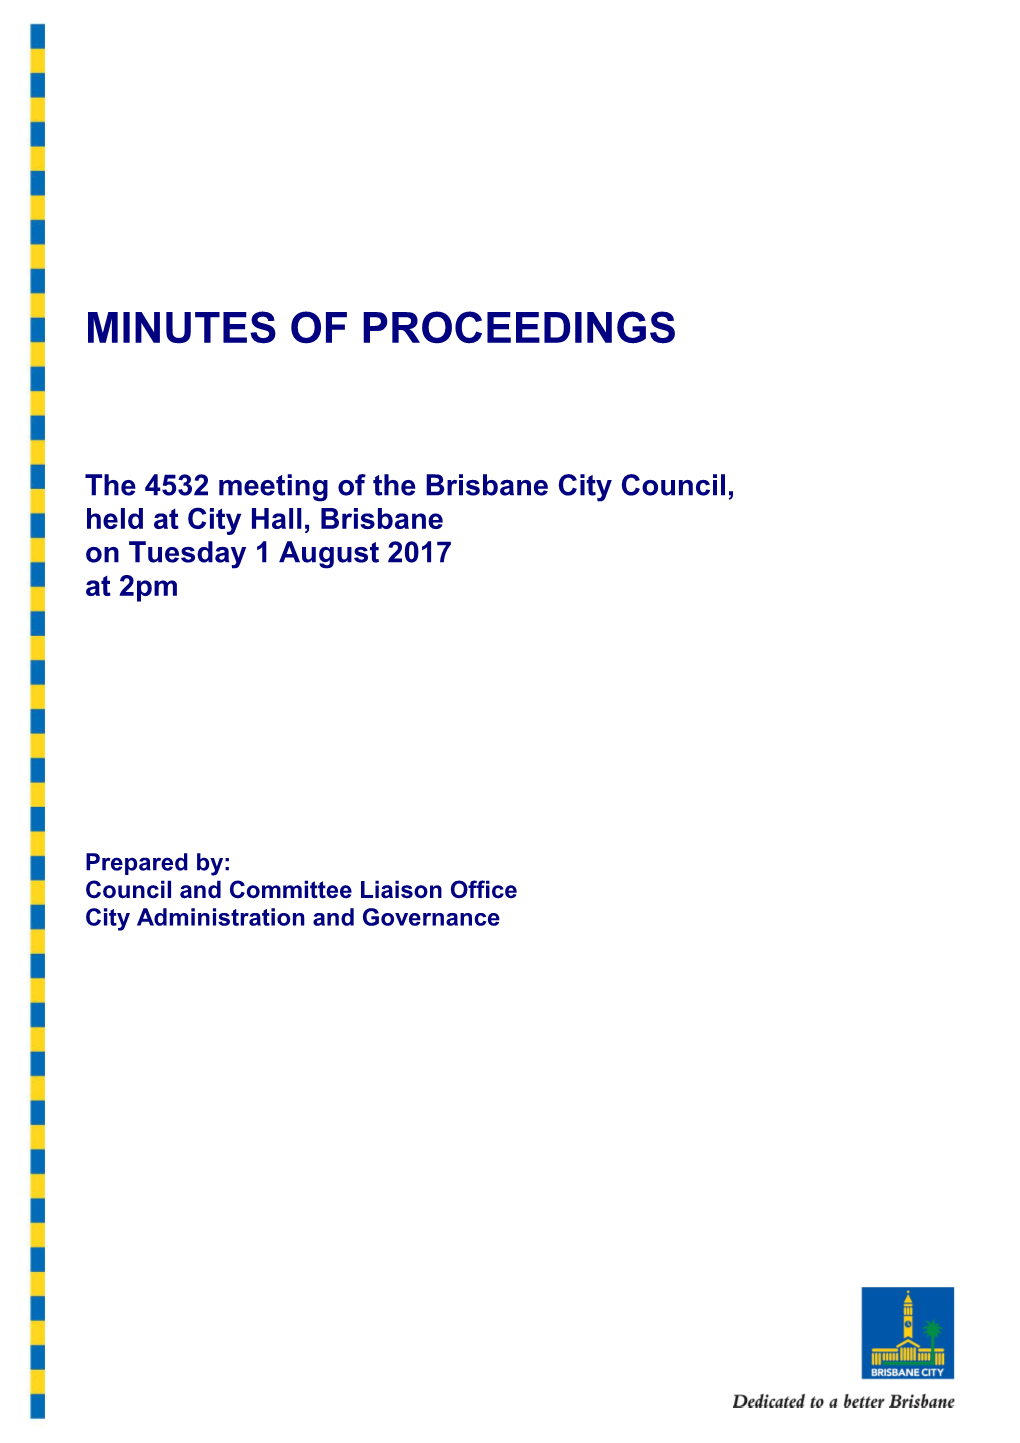 The 4532 Meeting of the Brisbane City Council